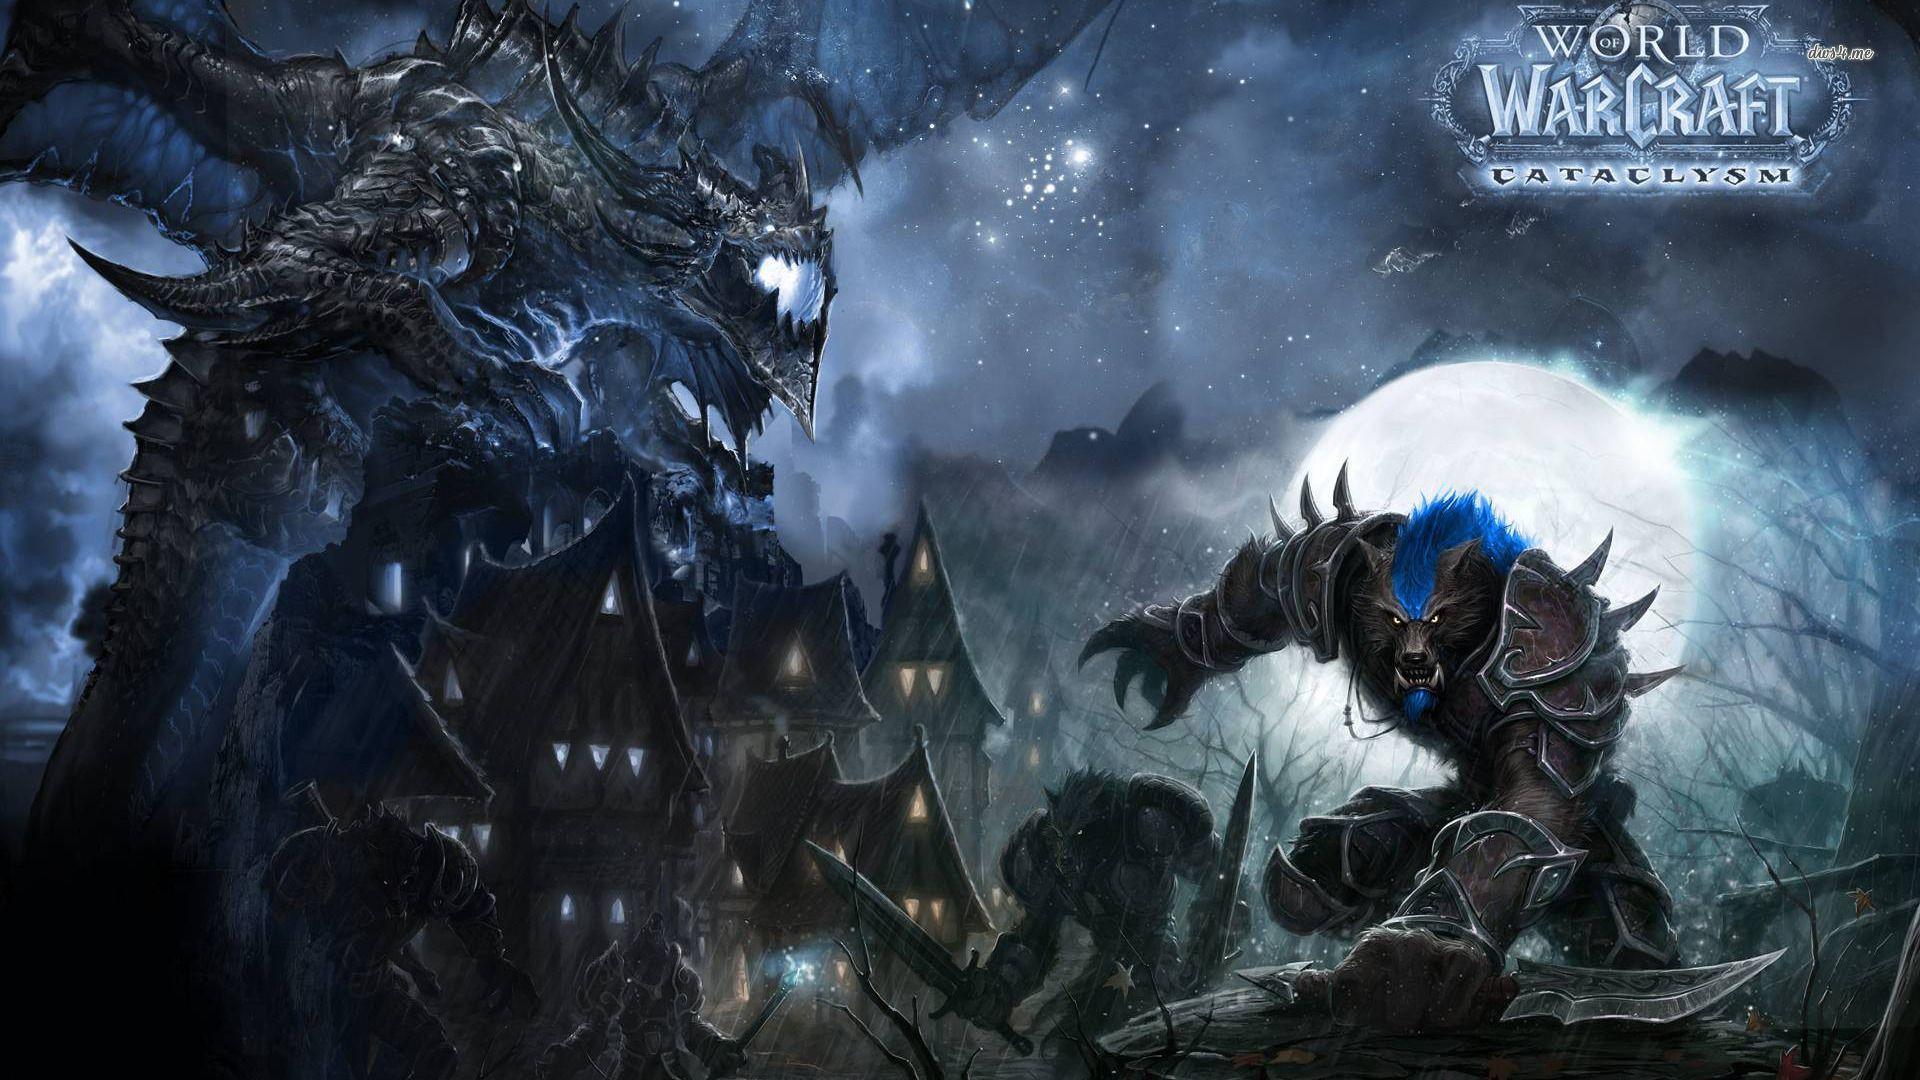 1920x1080 / 1920x1080 world of warcraft wallpaper JPG 337 kB -  Coolwallpapers.me!